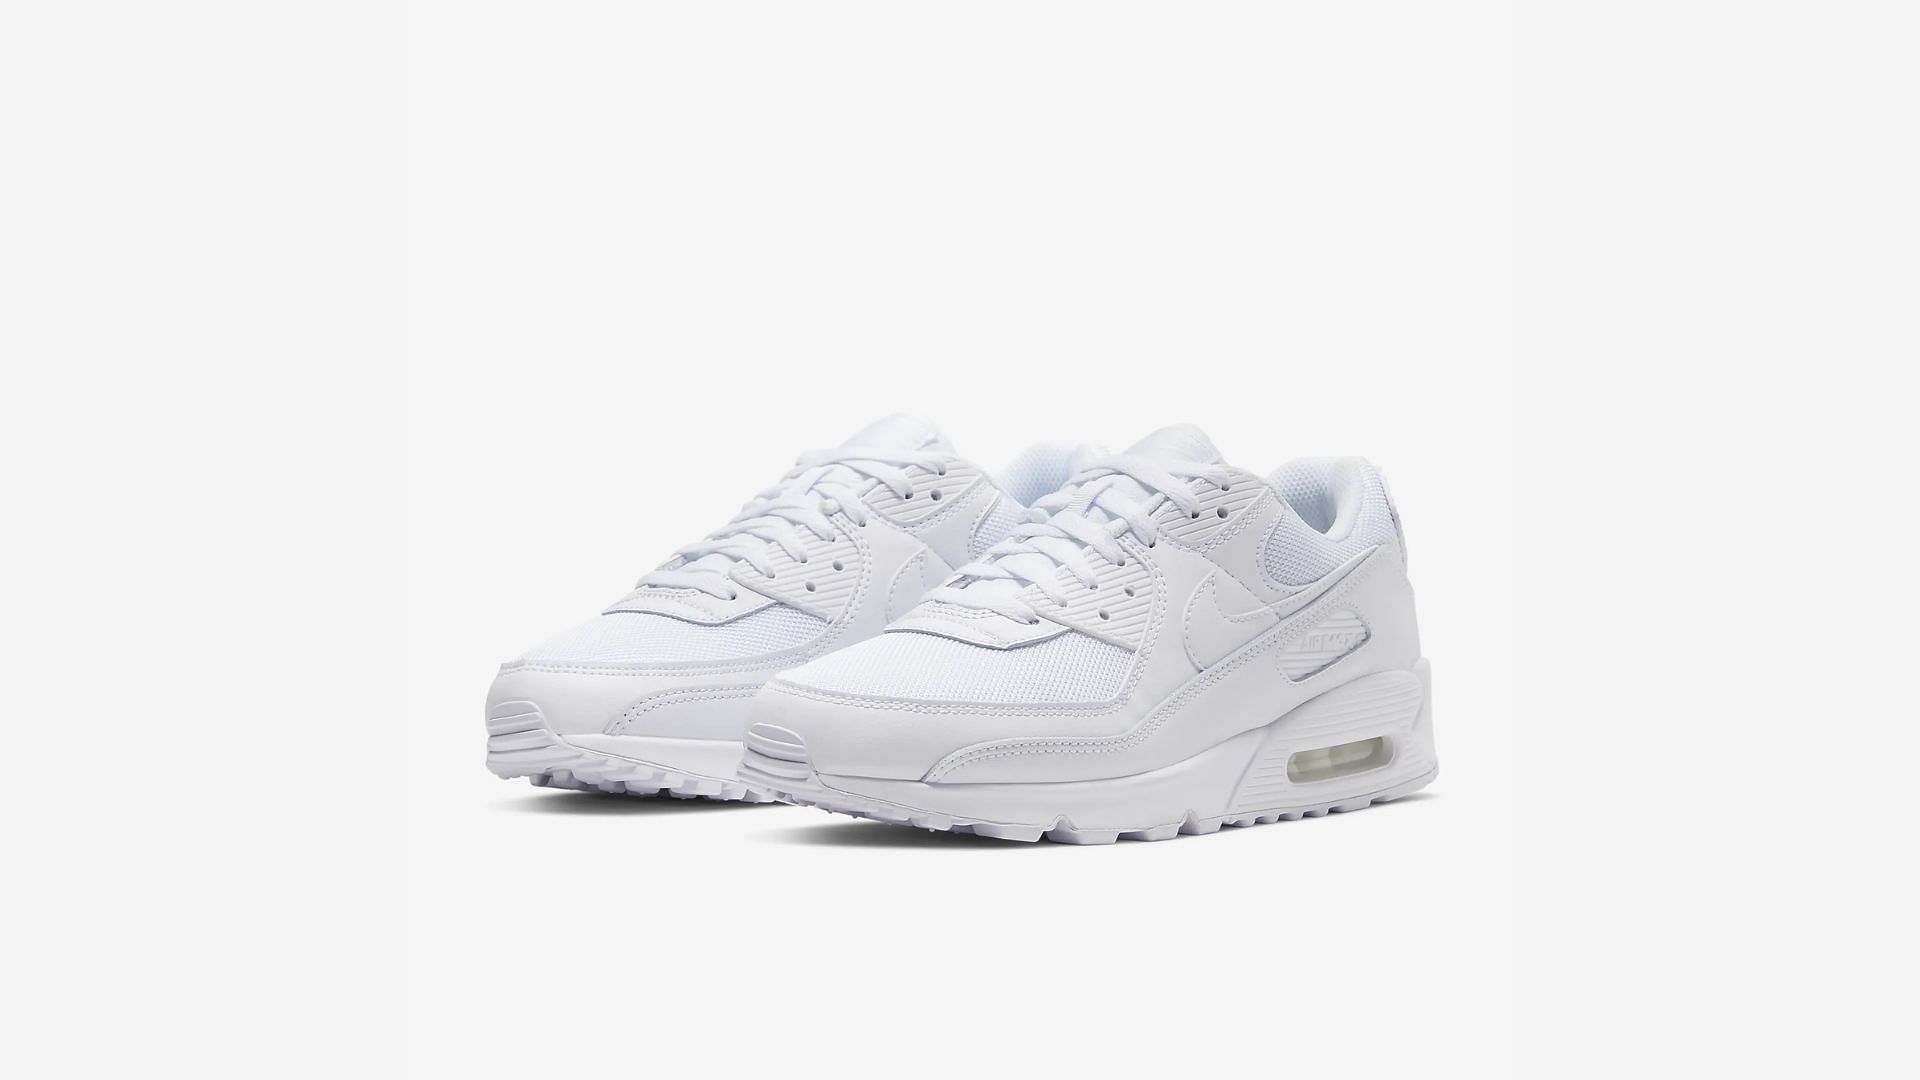 Nike Air Max 90 &quot; White/ Woolf Grey&quot; ( Image via Nike)